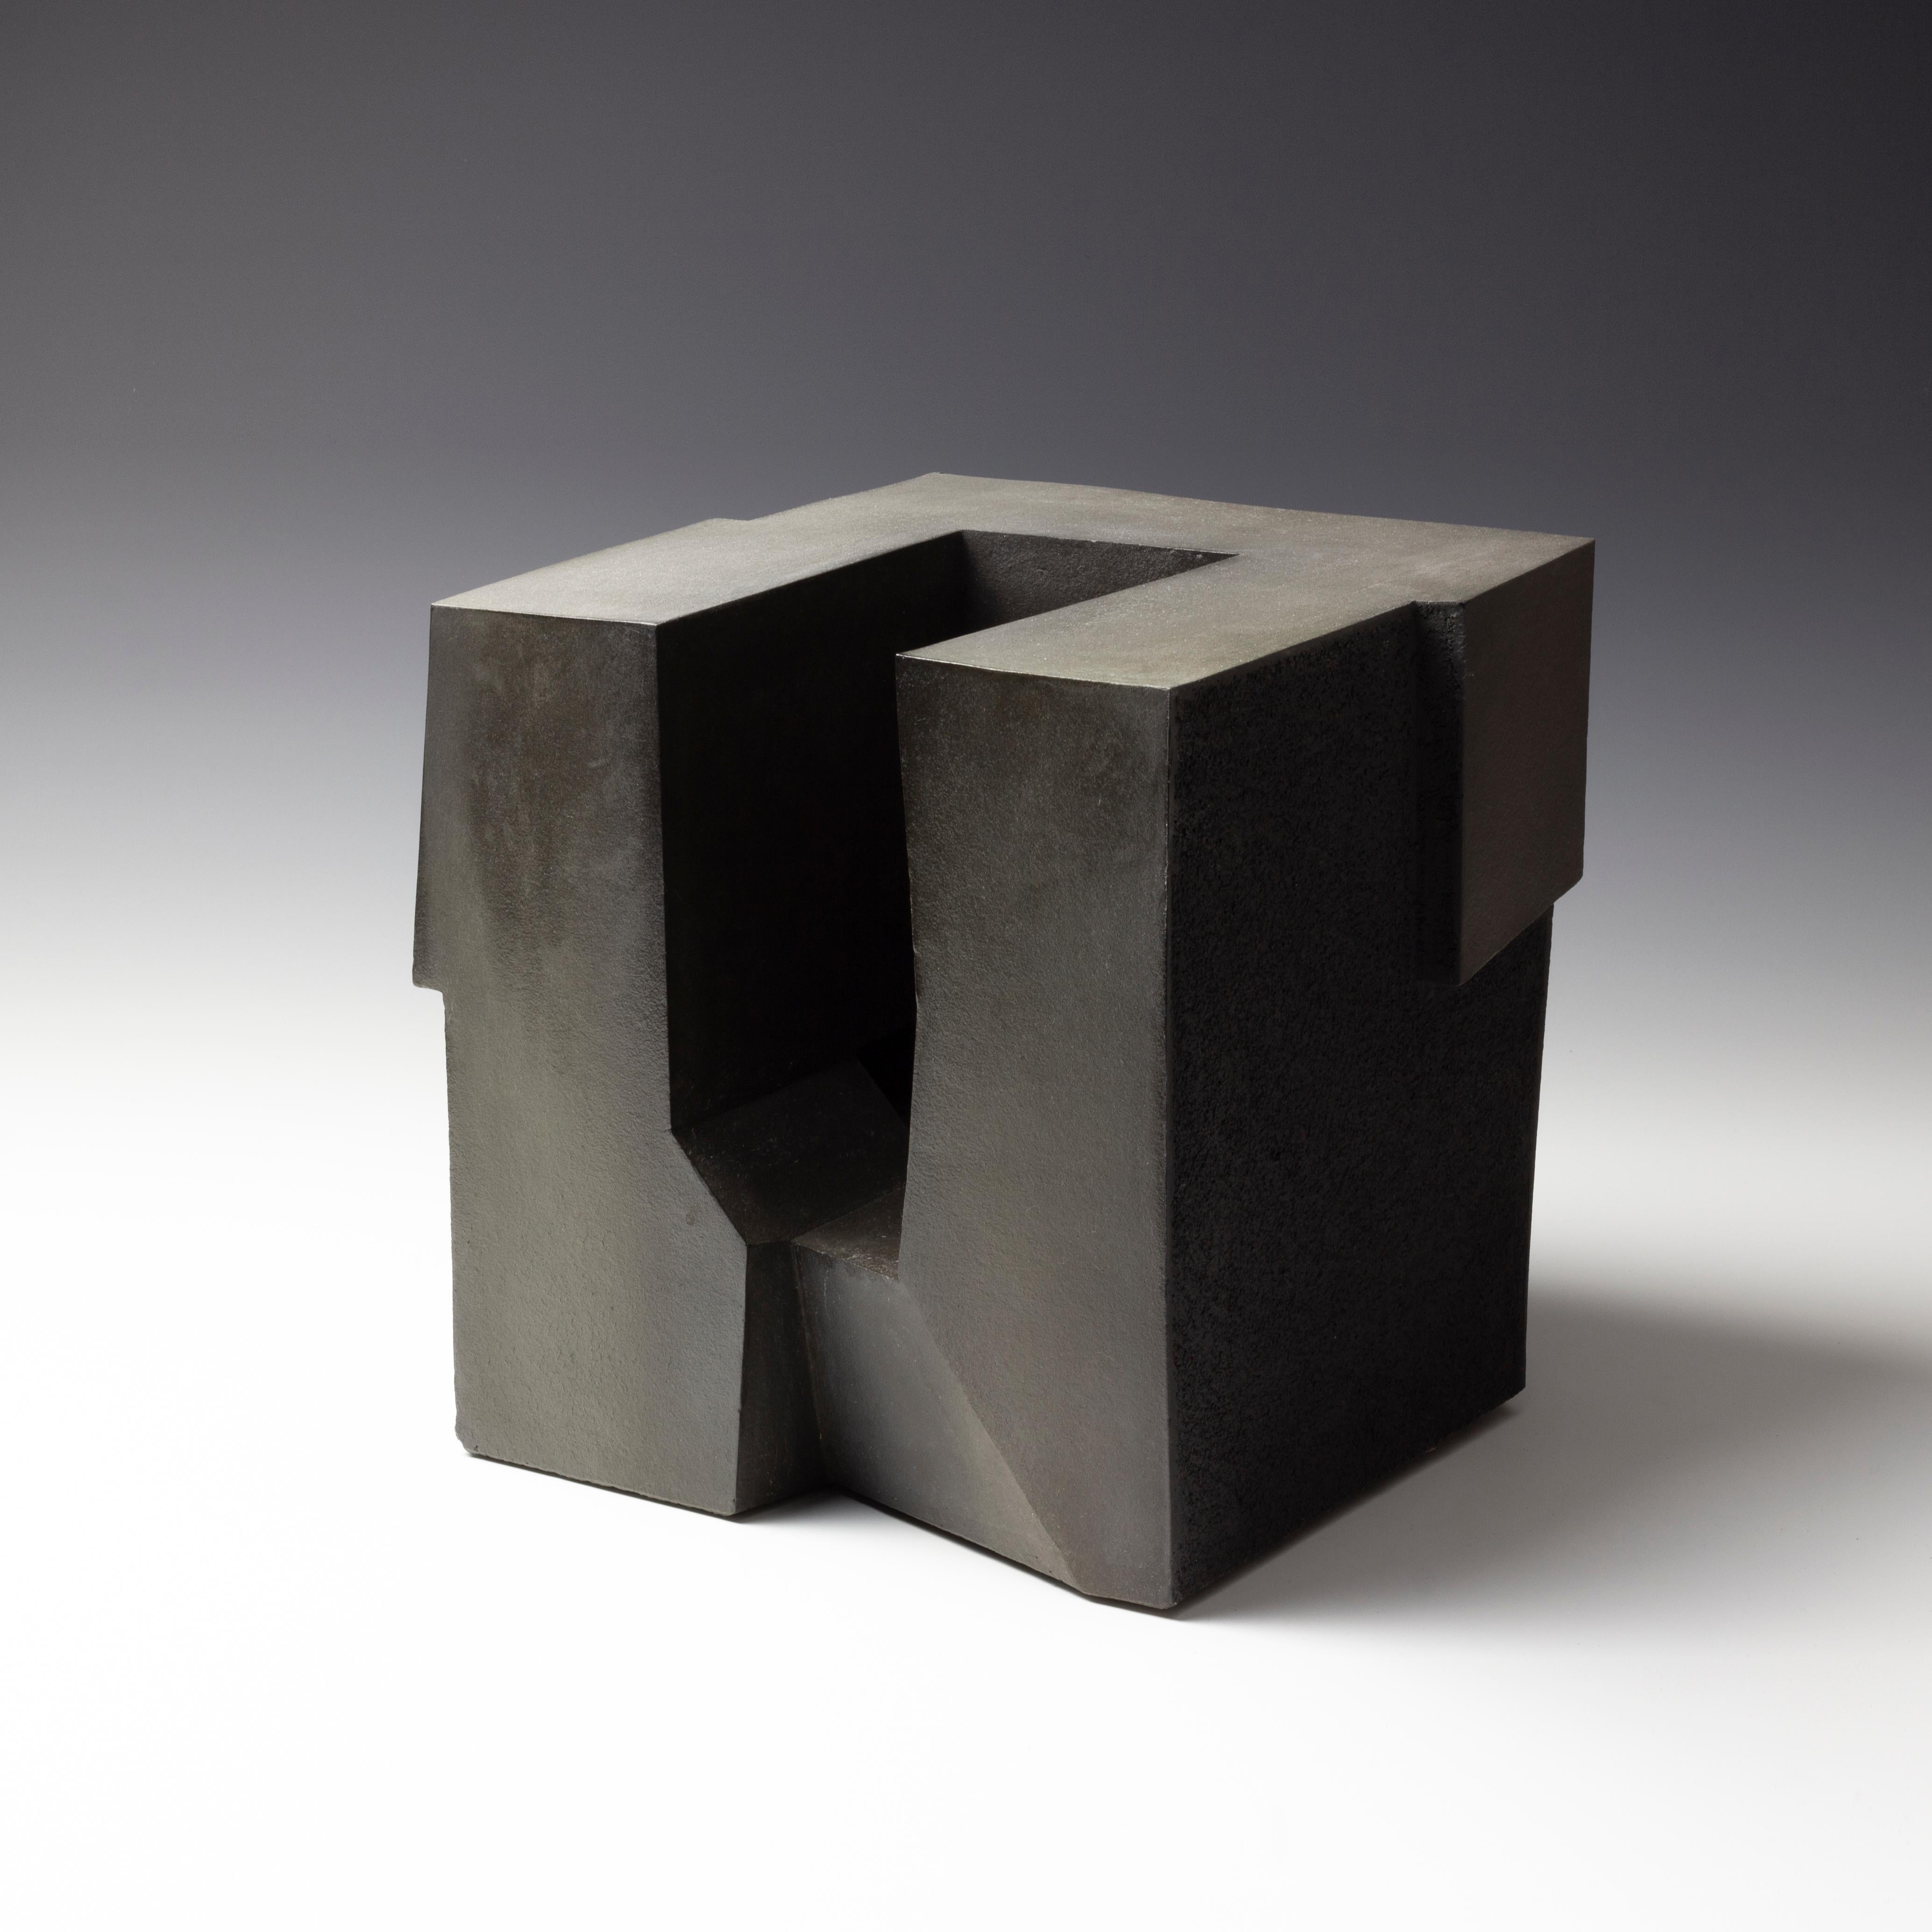 Museum quality artwork by Enric Mestre, born 1936 in Valencia Spain. Mestre is recognized worldwide, won many international awards and has participated in numerous individual and collective exhibitions around the world. His sculptural objects seem